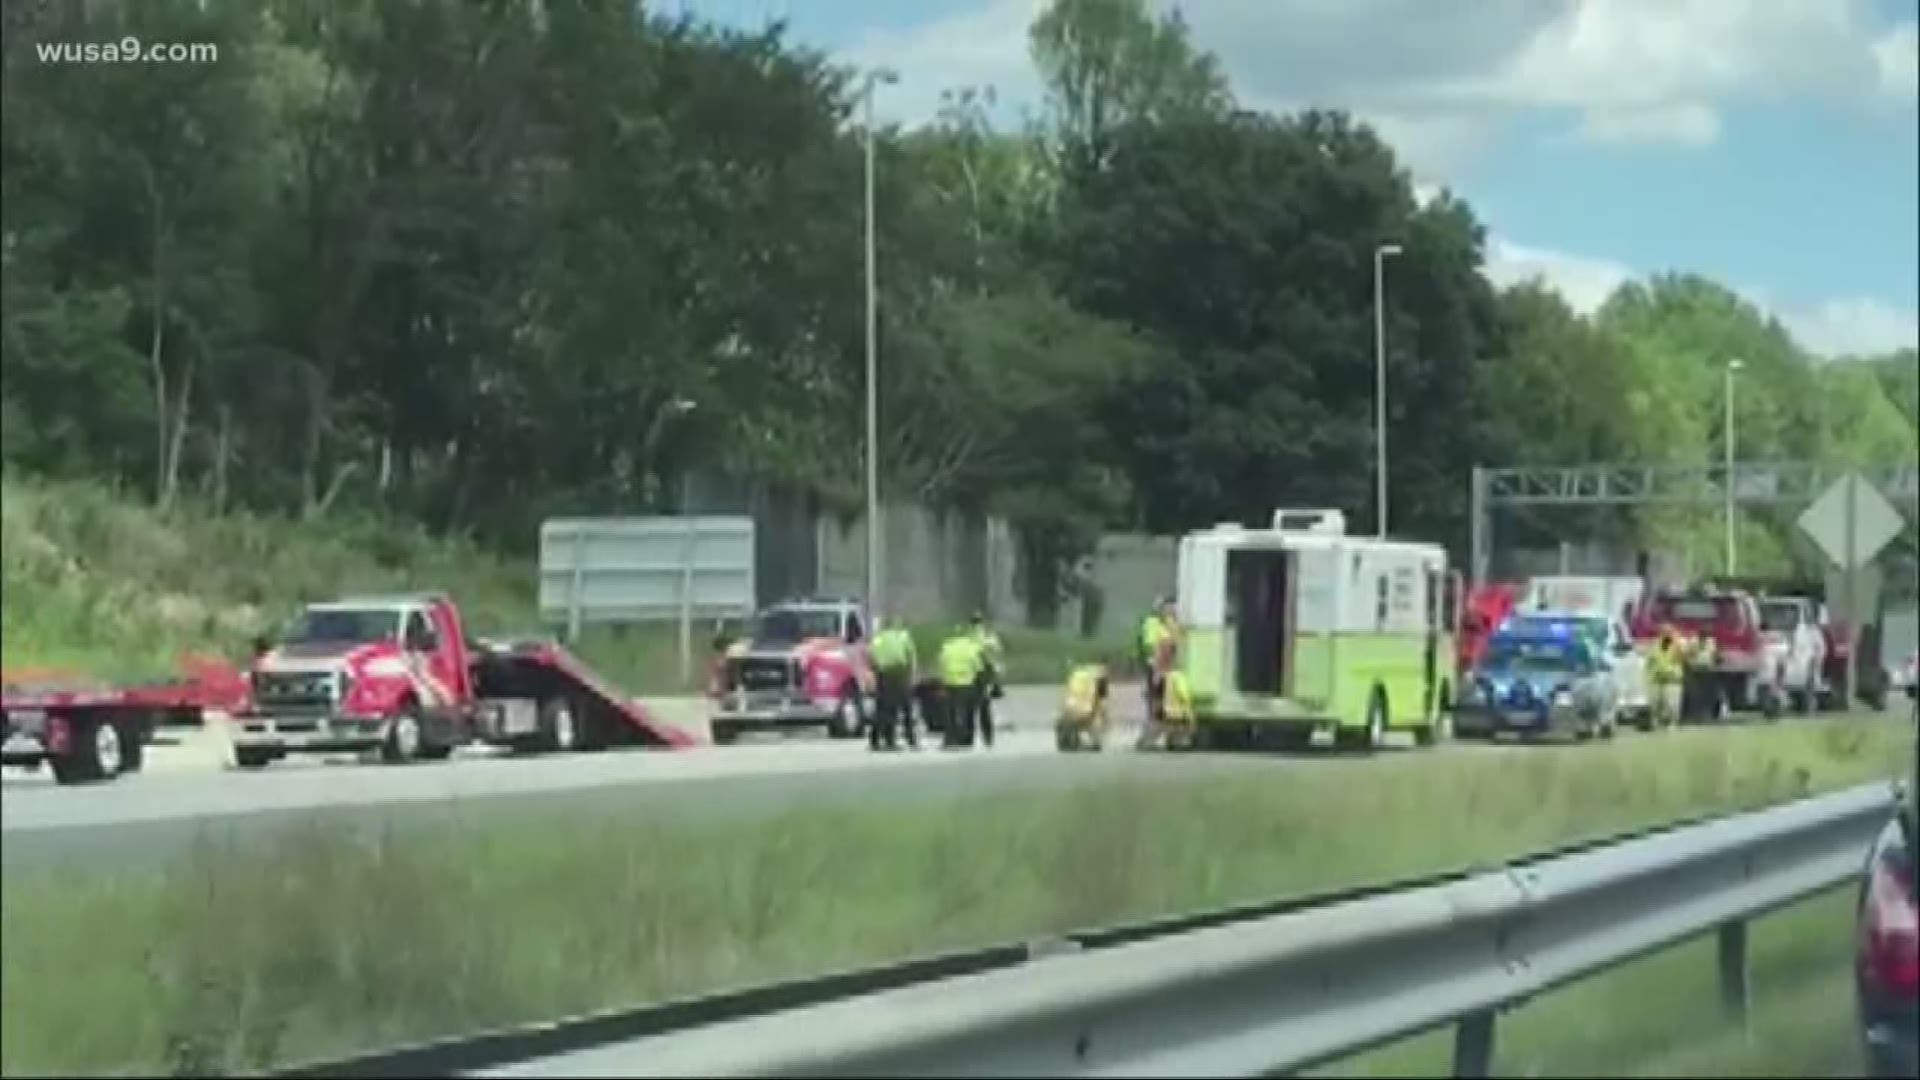 We now know the name of the victim in a deadly crash that happened on I-66 this weekend. 28- year-old Joseph Castellano of McLean -- died at the scene of Saturday's chain reaction crash near Route 28 in Fairfax County. His wife remains hospitalized with life-threatening injuries. Eight vehicles -- including a tractor trailer that overturned -- were involved in the crash.